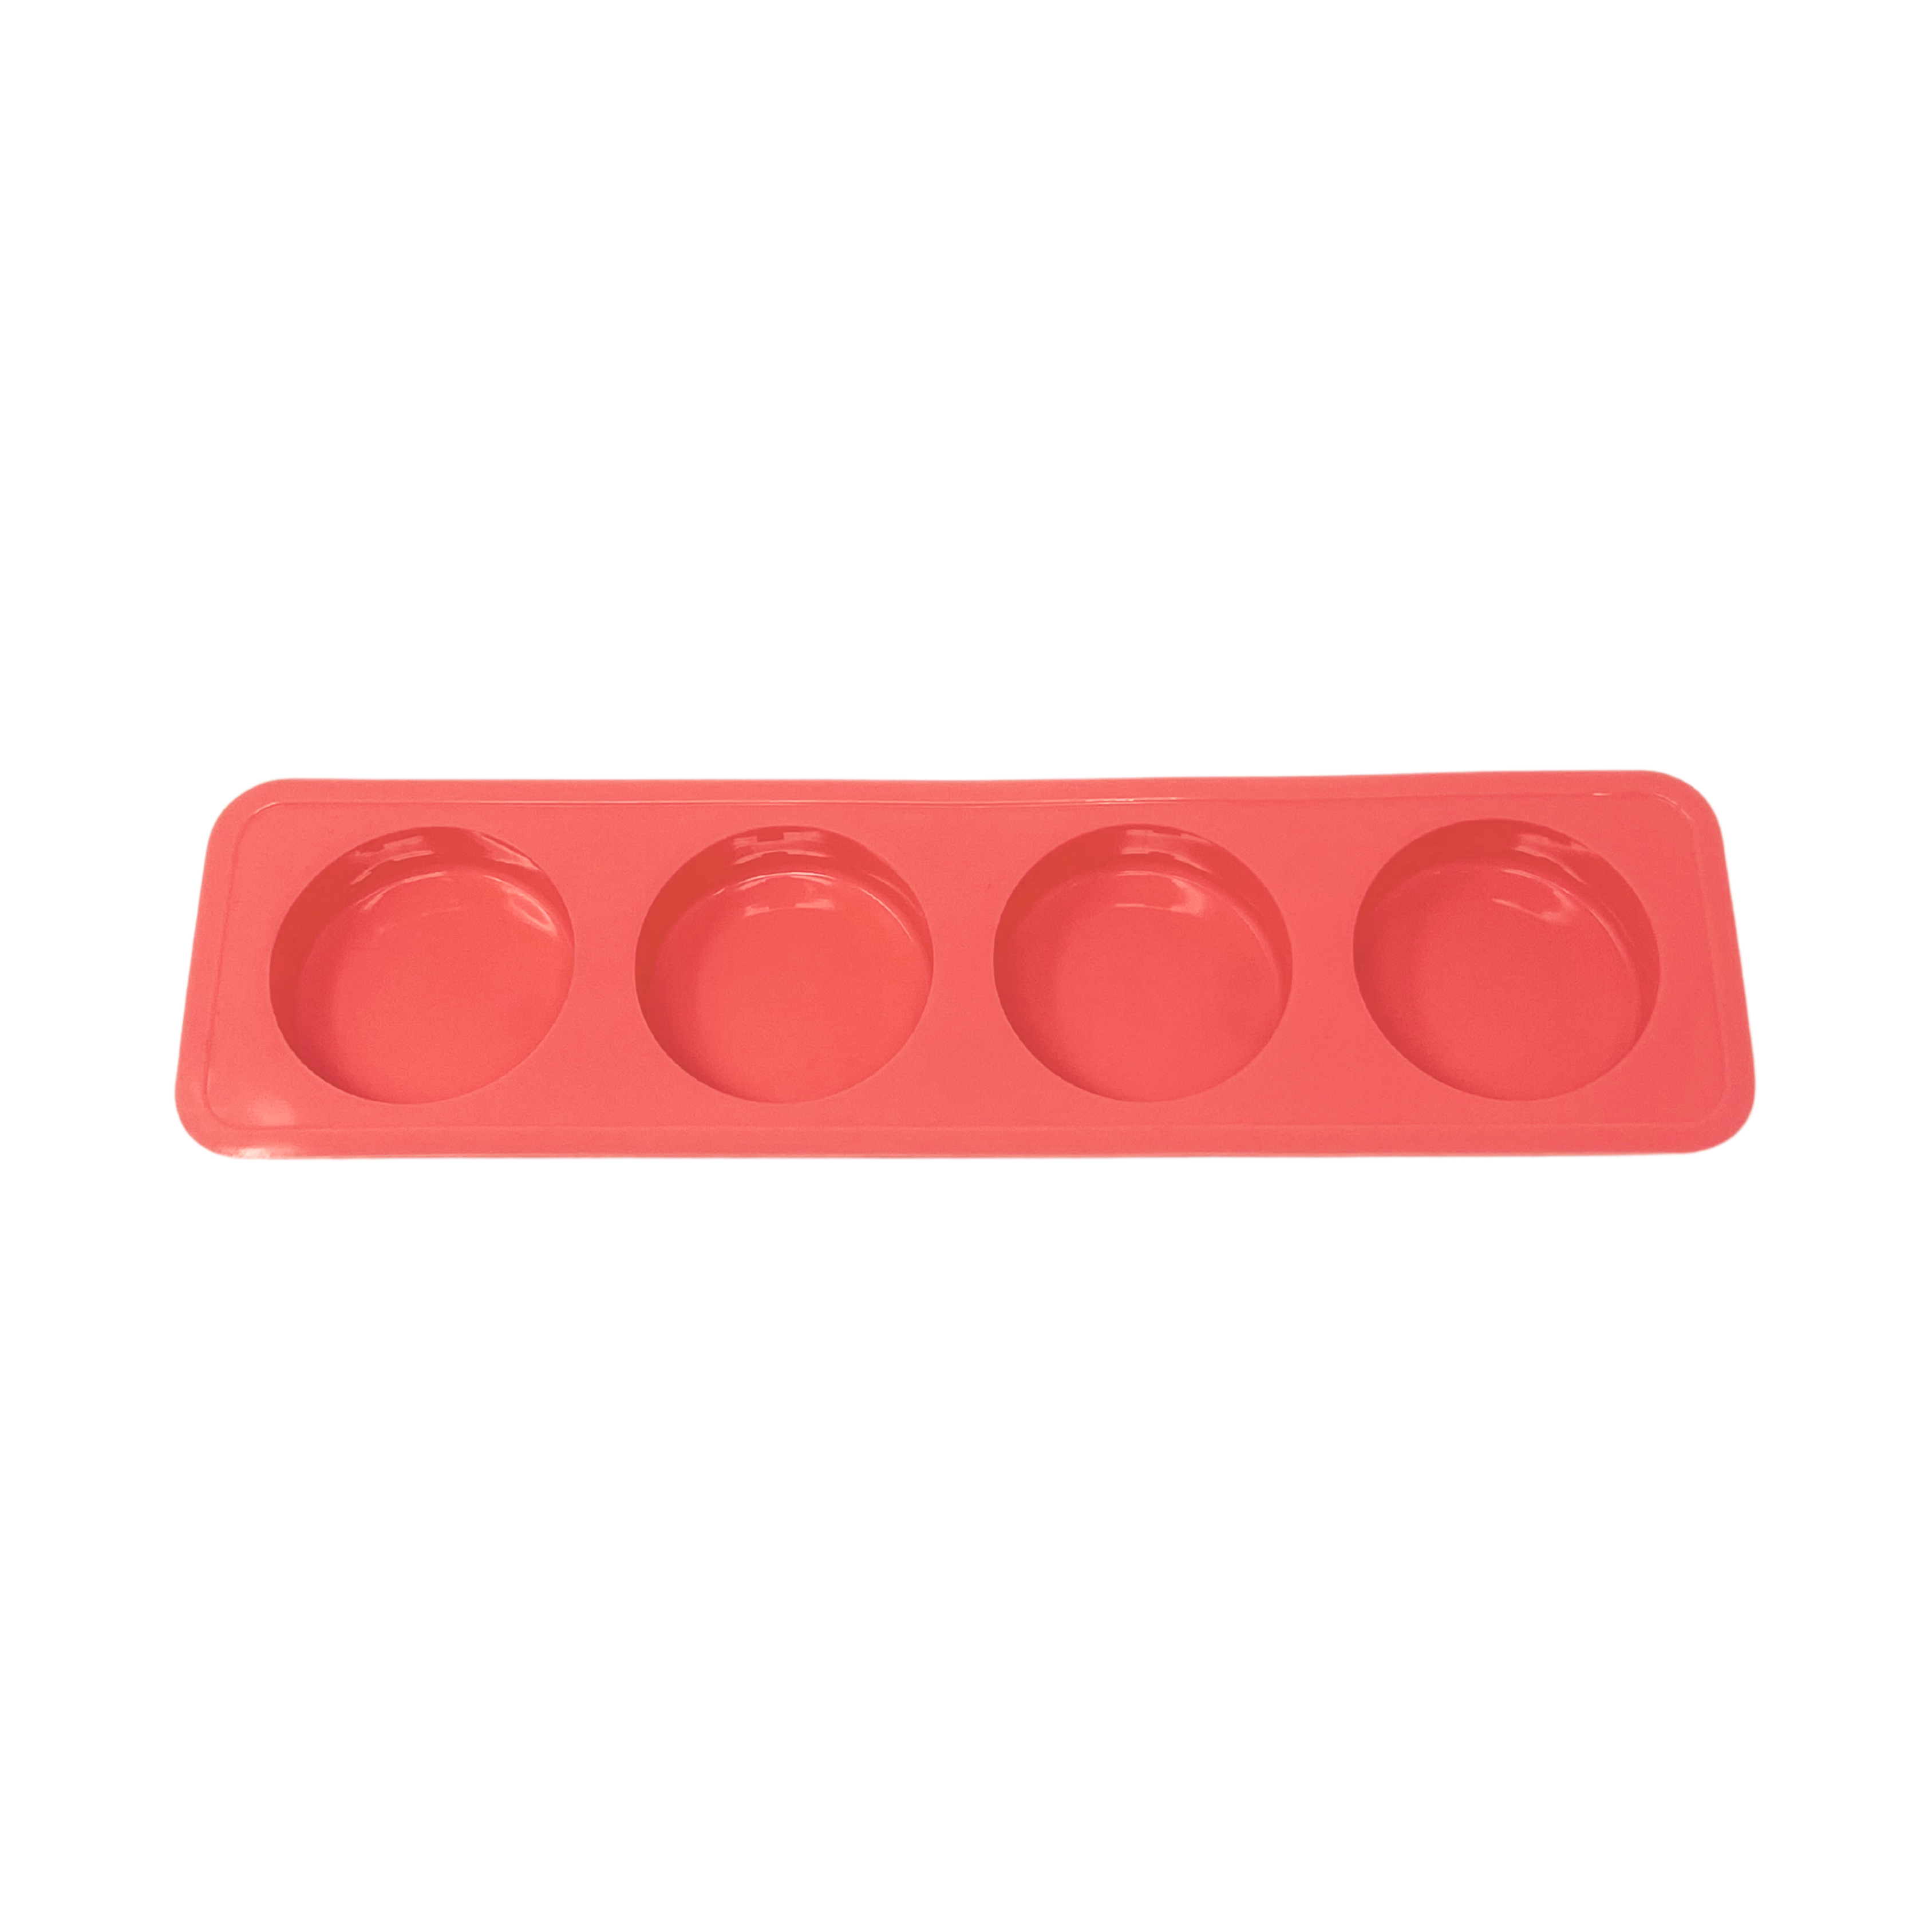 75ml Round Soap Mould - The Mould Story